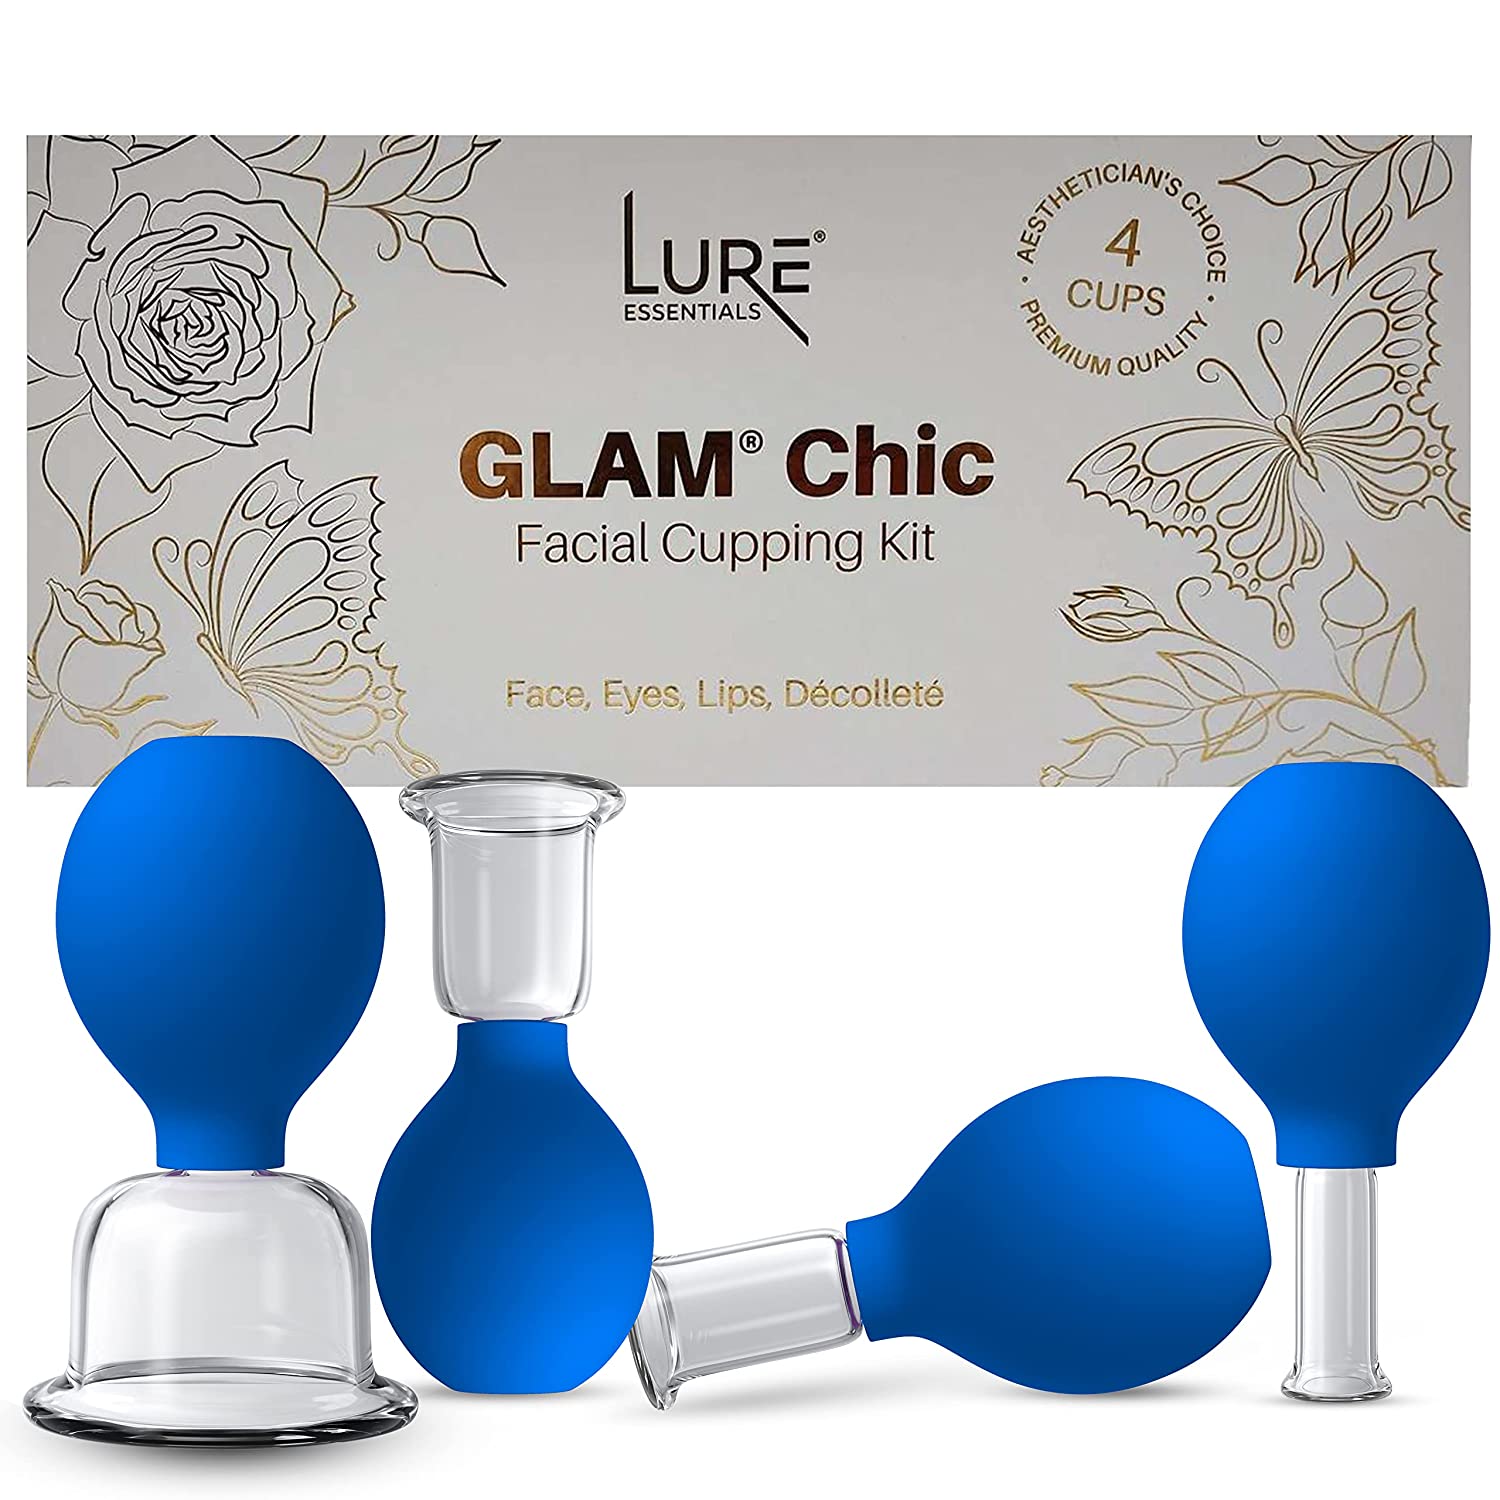 Cupping Sets and Therapy for Beauty - Lure Essentials